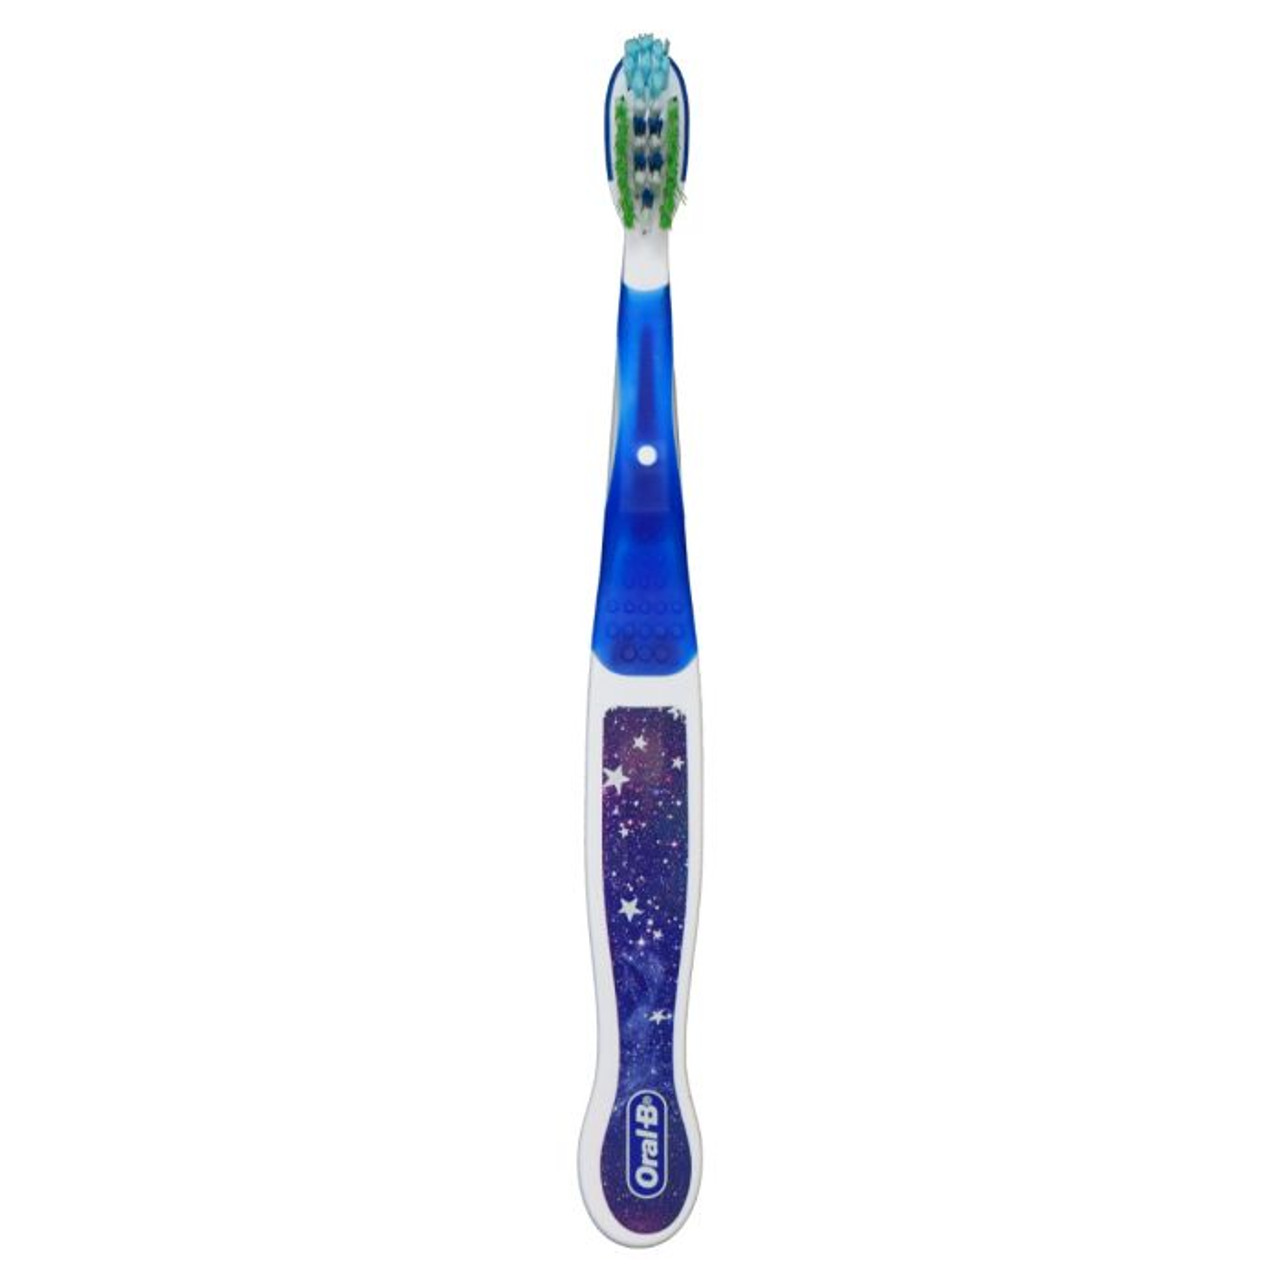 P&G Oral-B Kid's Toothbrush Stages 4, 8-12 Years, Star Graphics, 4 Assorted Colors, 6/bx (old part #s 80319267, 80235999)